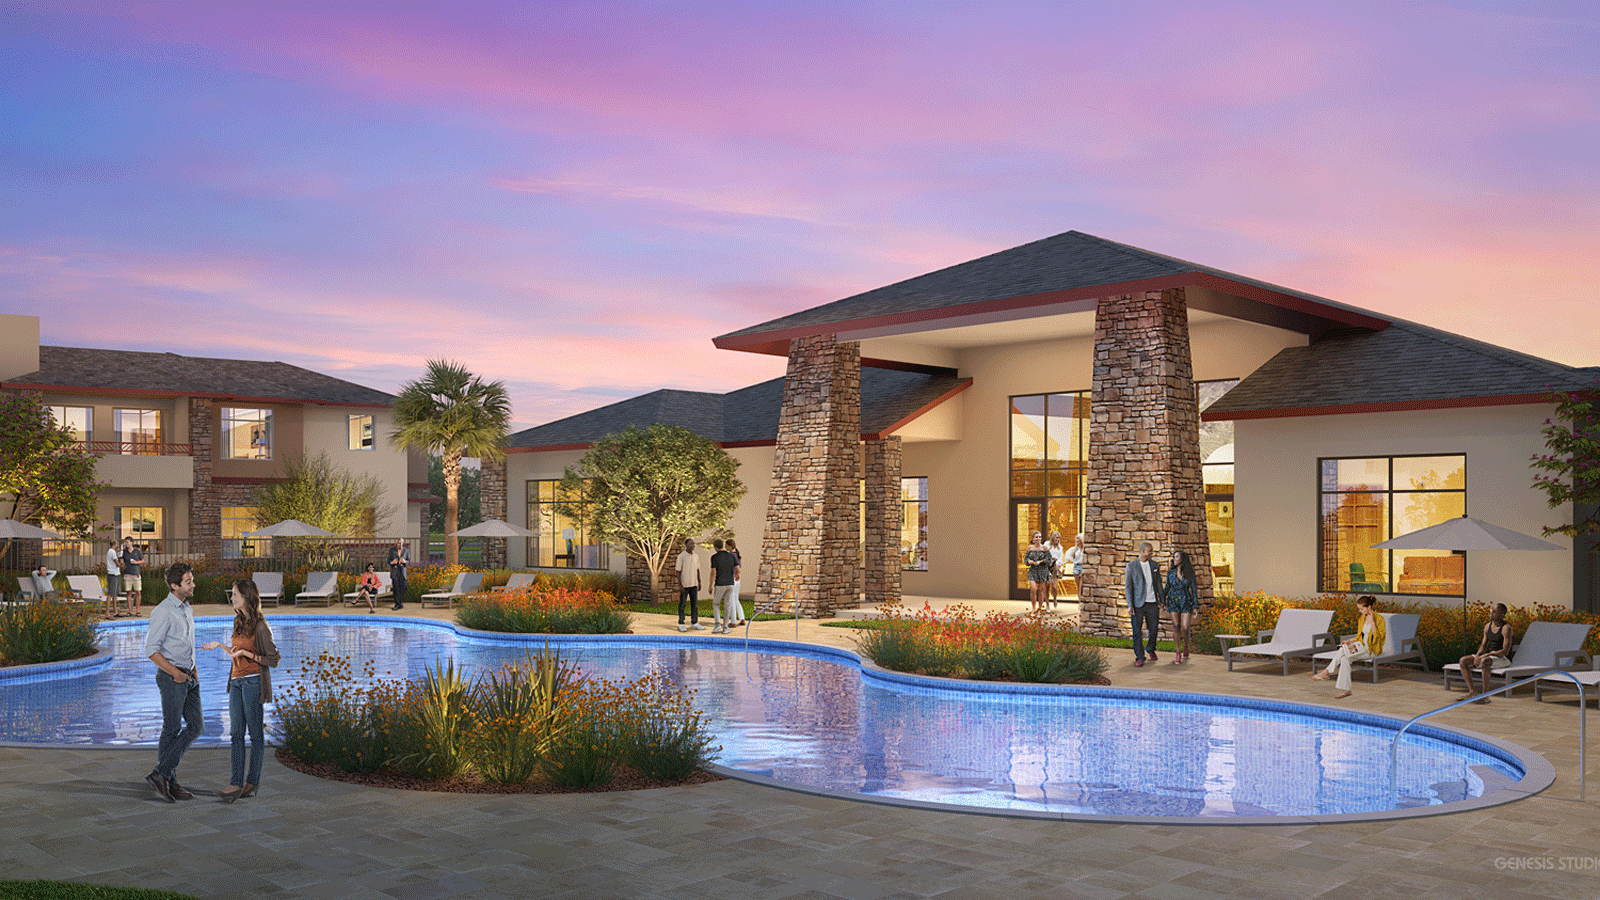 A new luxury apartment complex is set to open in the Vistancia neighborhood of Peoria....